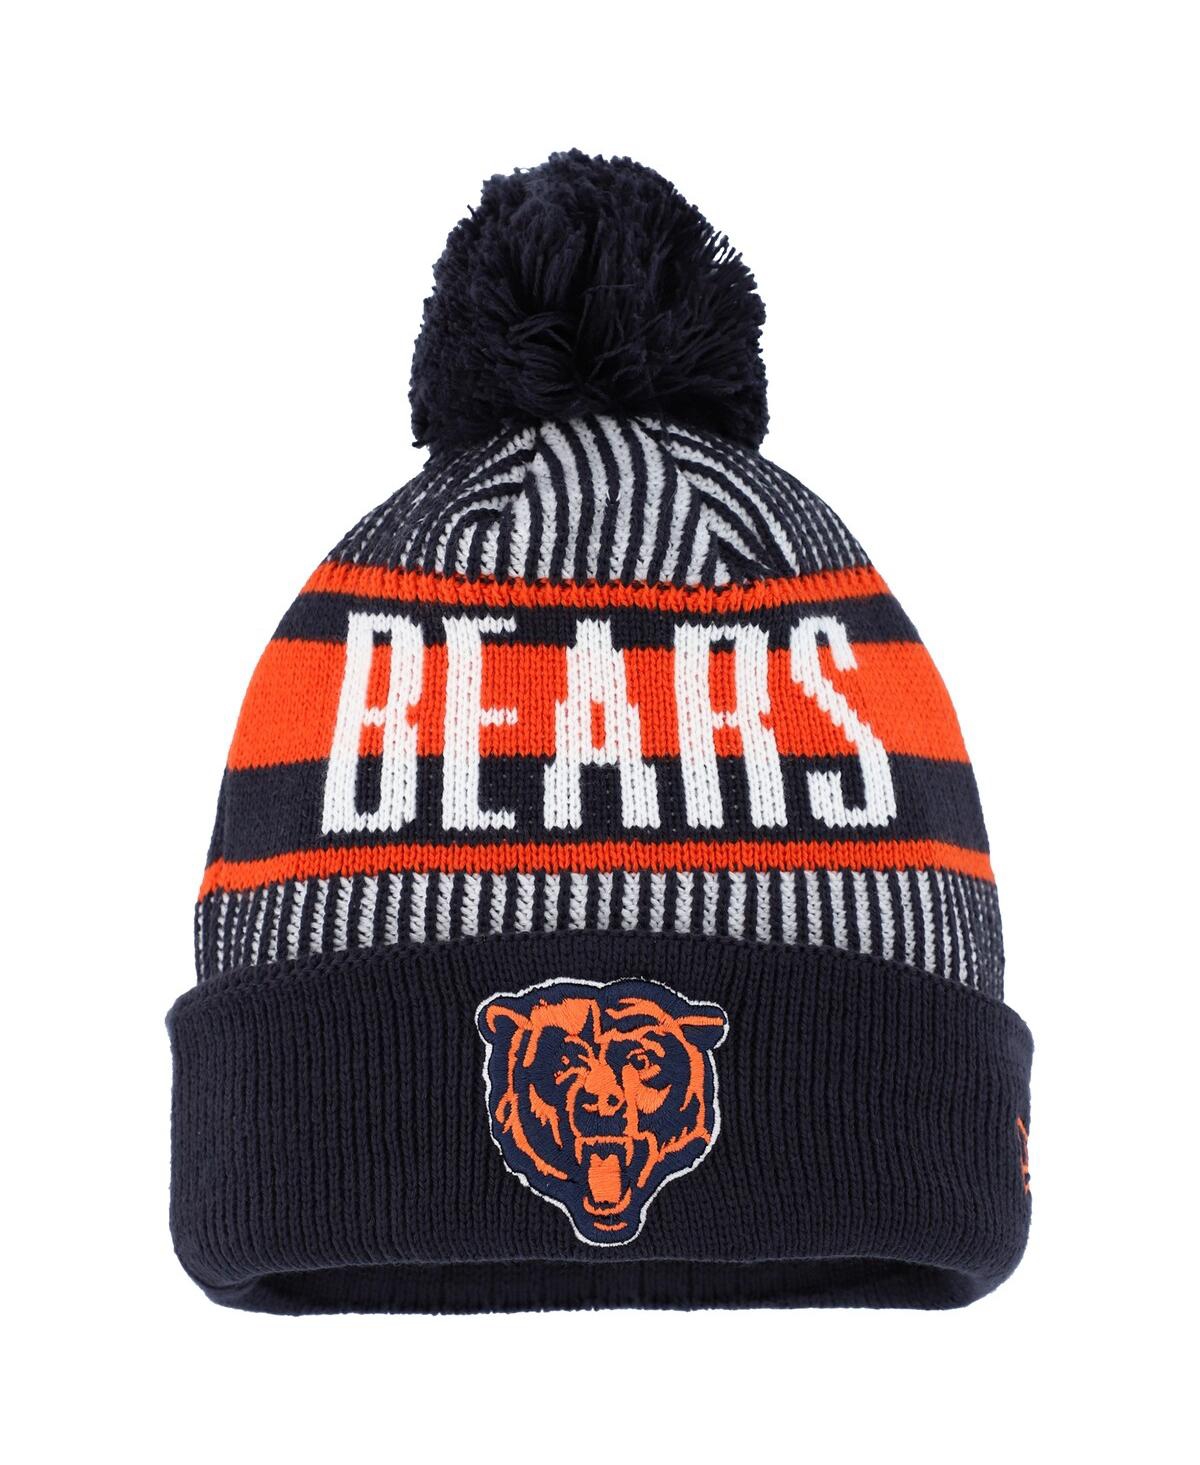 New Era Kids' Youth Boys And Girls  Navy Chicago Bears Striped Cuffed Knit Hat With Pom